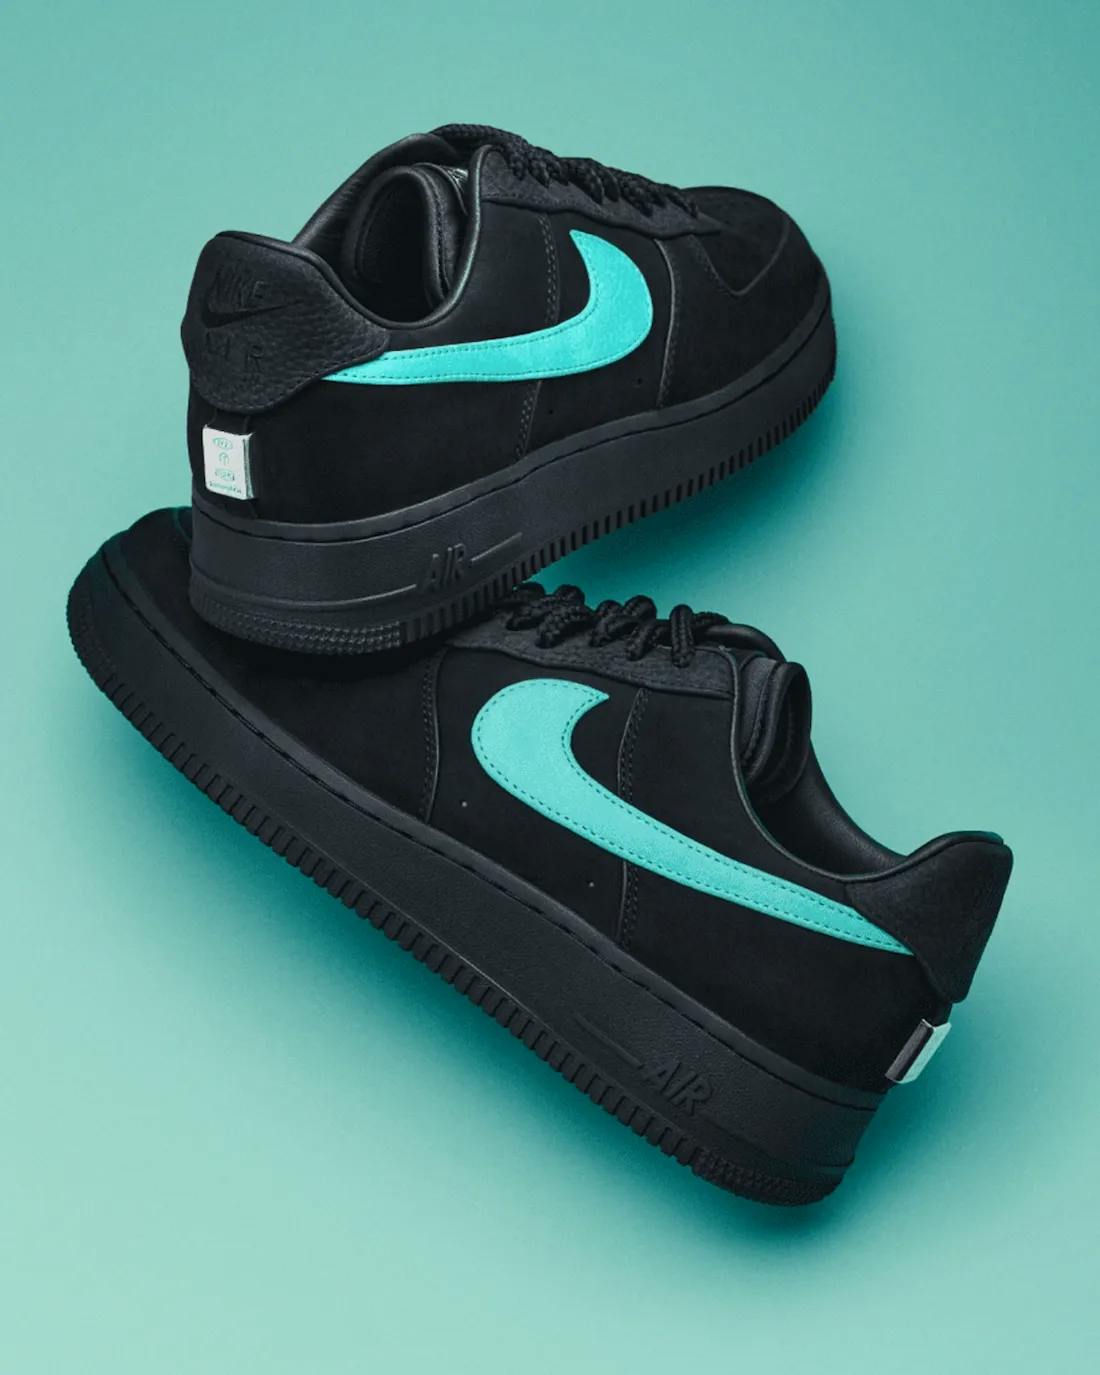 tiffany & co nike air force 1 low